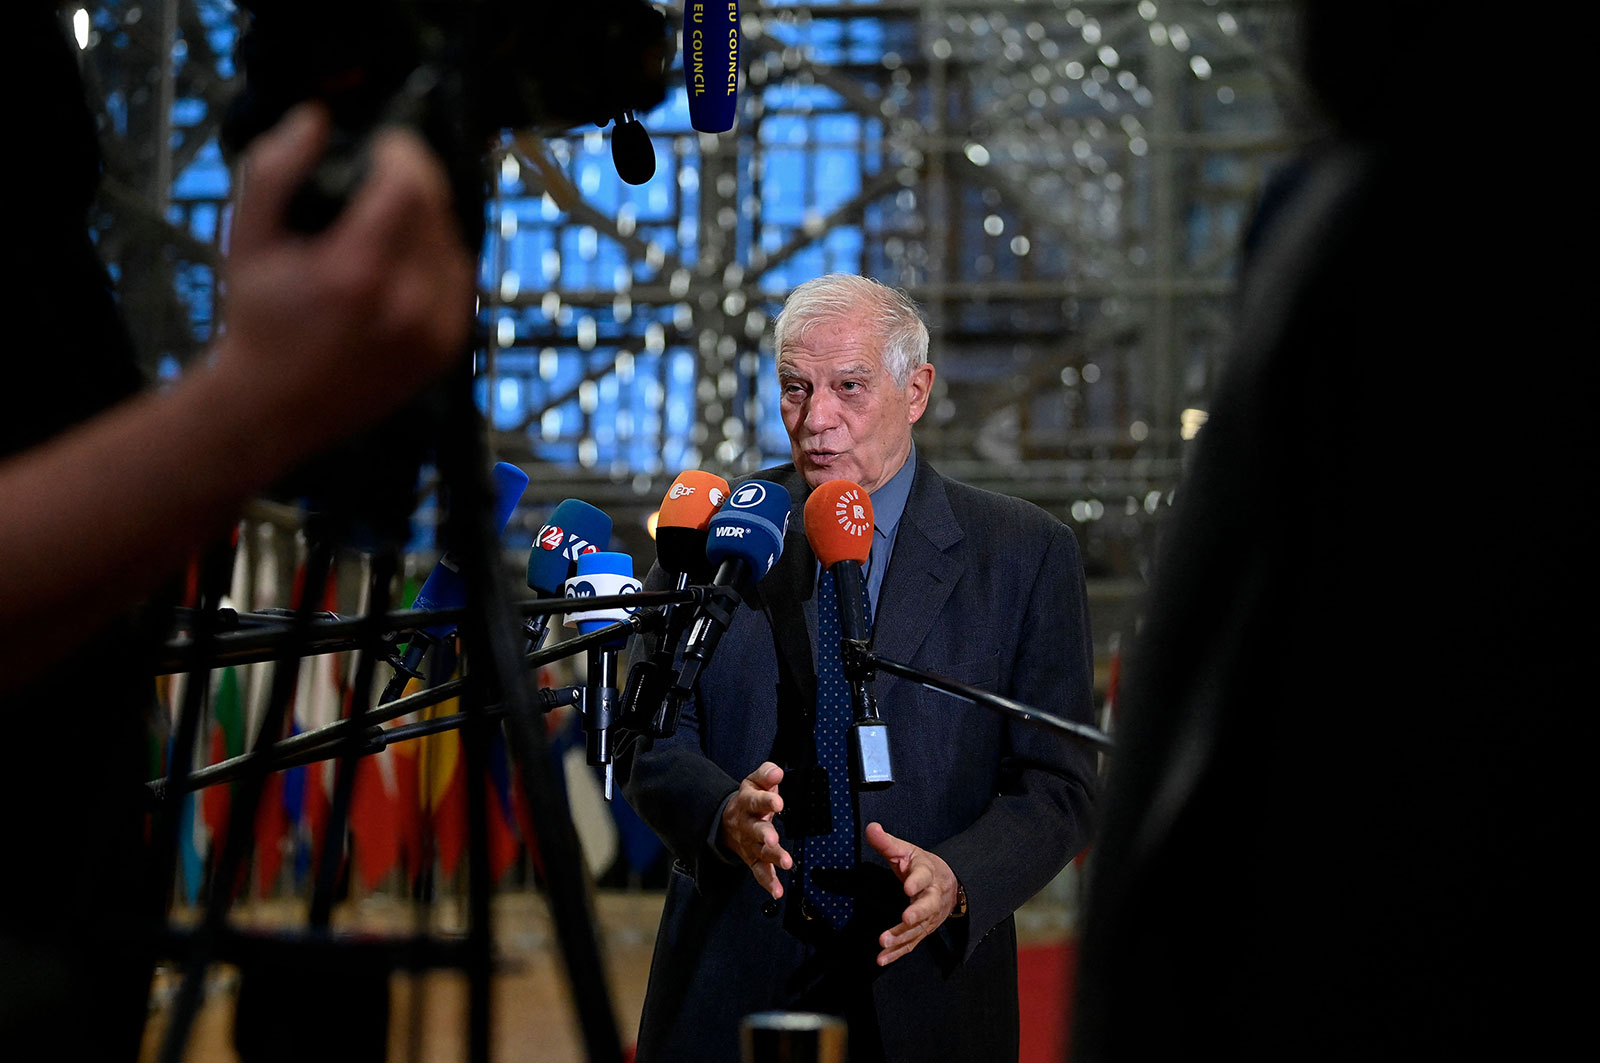 The European Union's foreign policy chief Josep Borrell talks to the press in Brussels on January 23.